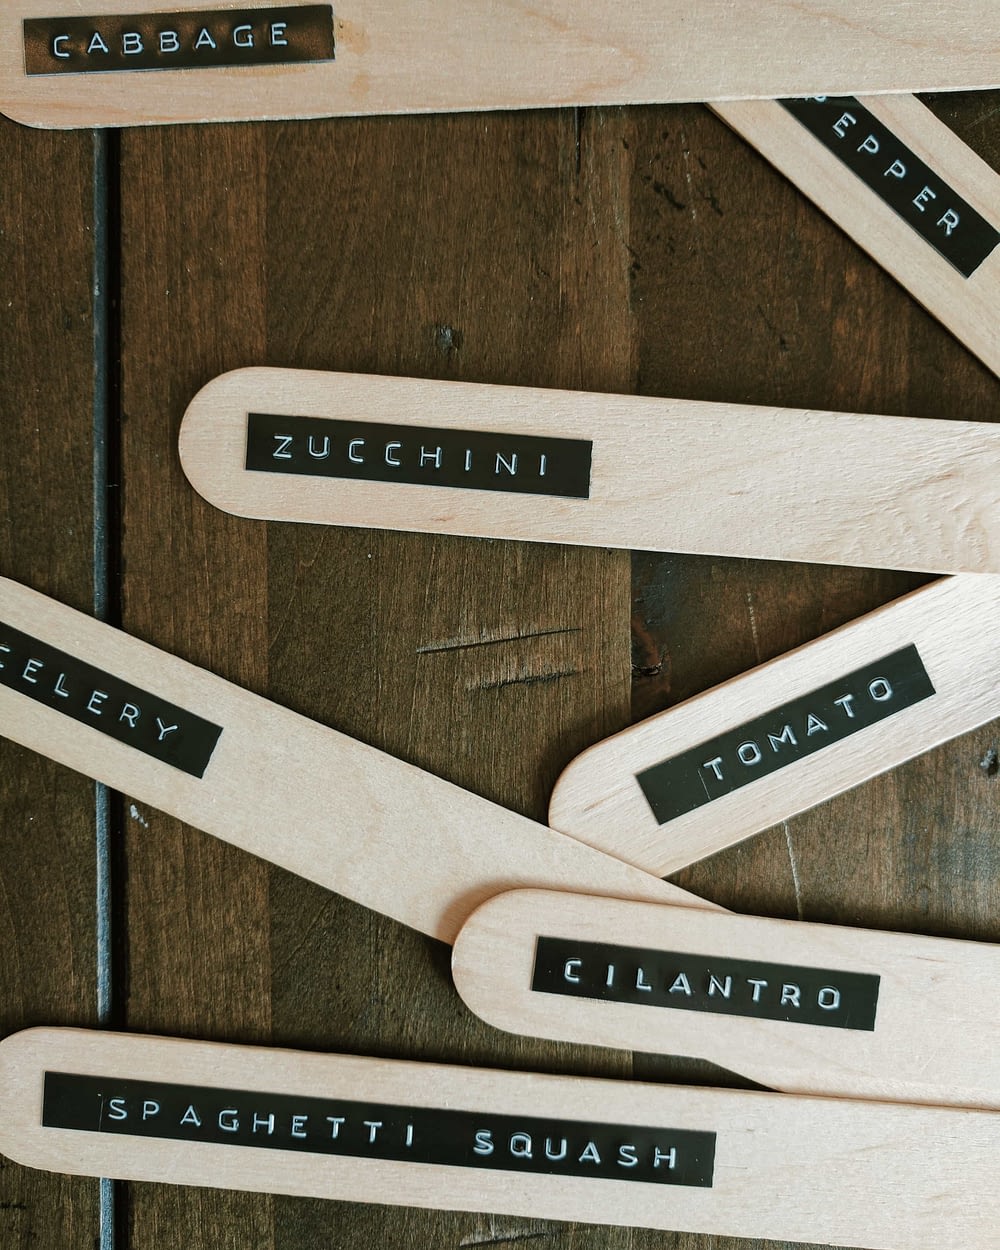 Popsicle sticks used as garden crop label stakes